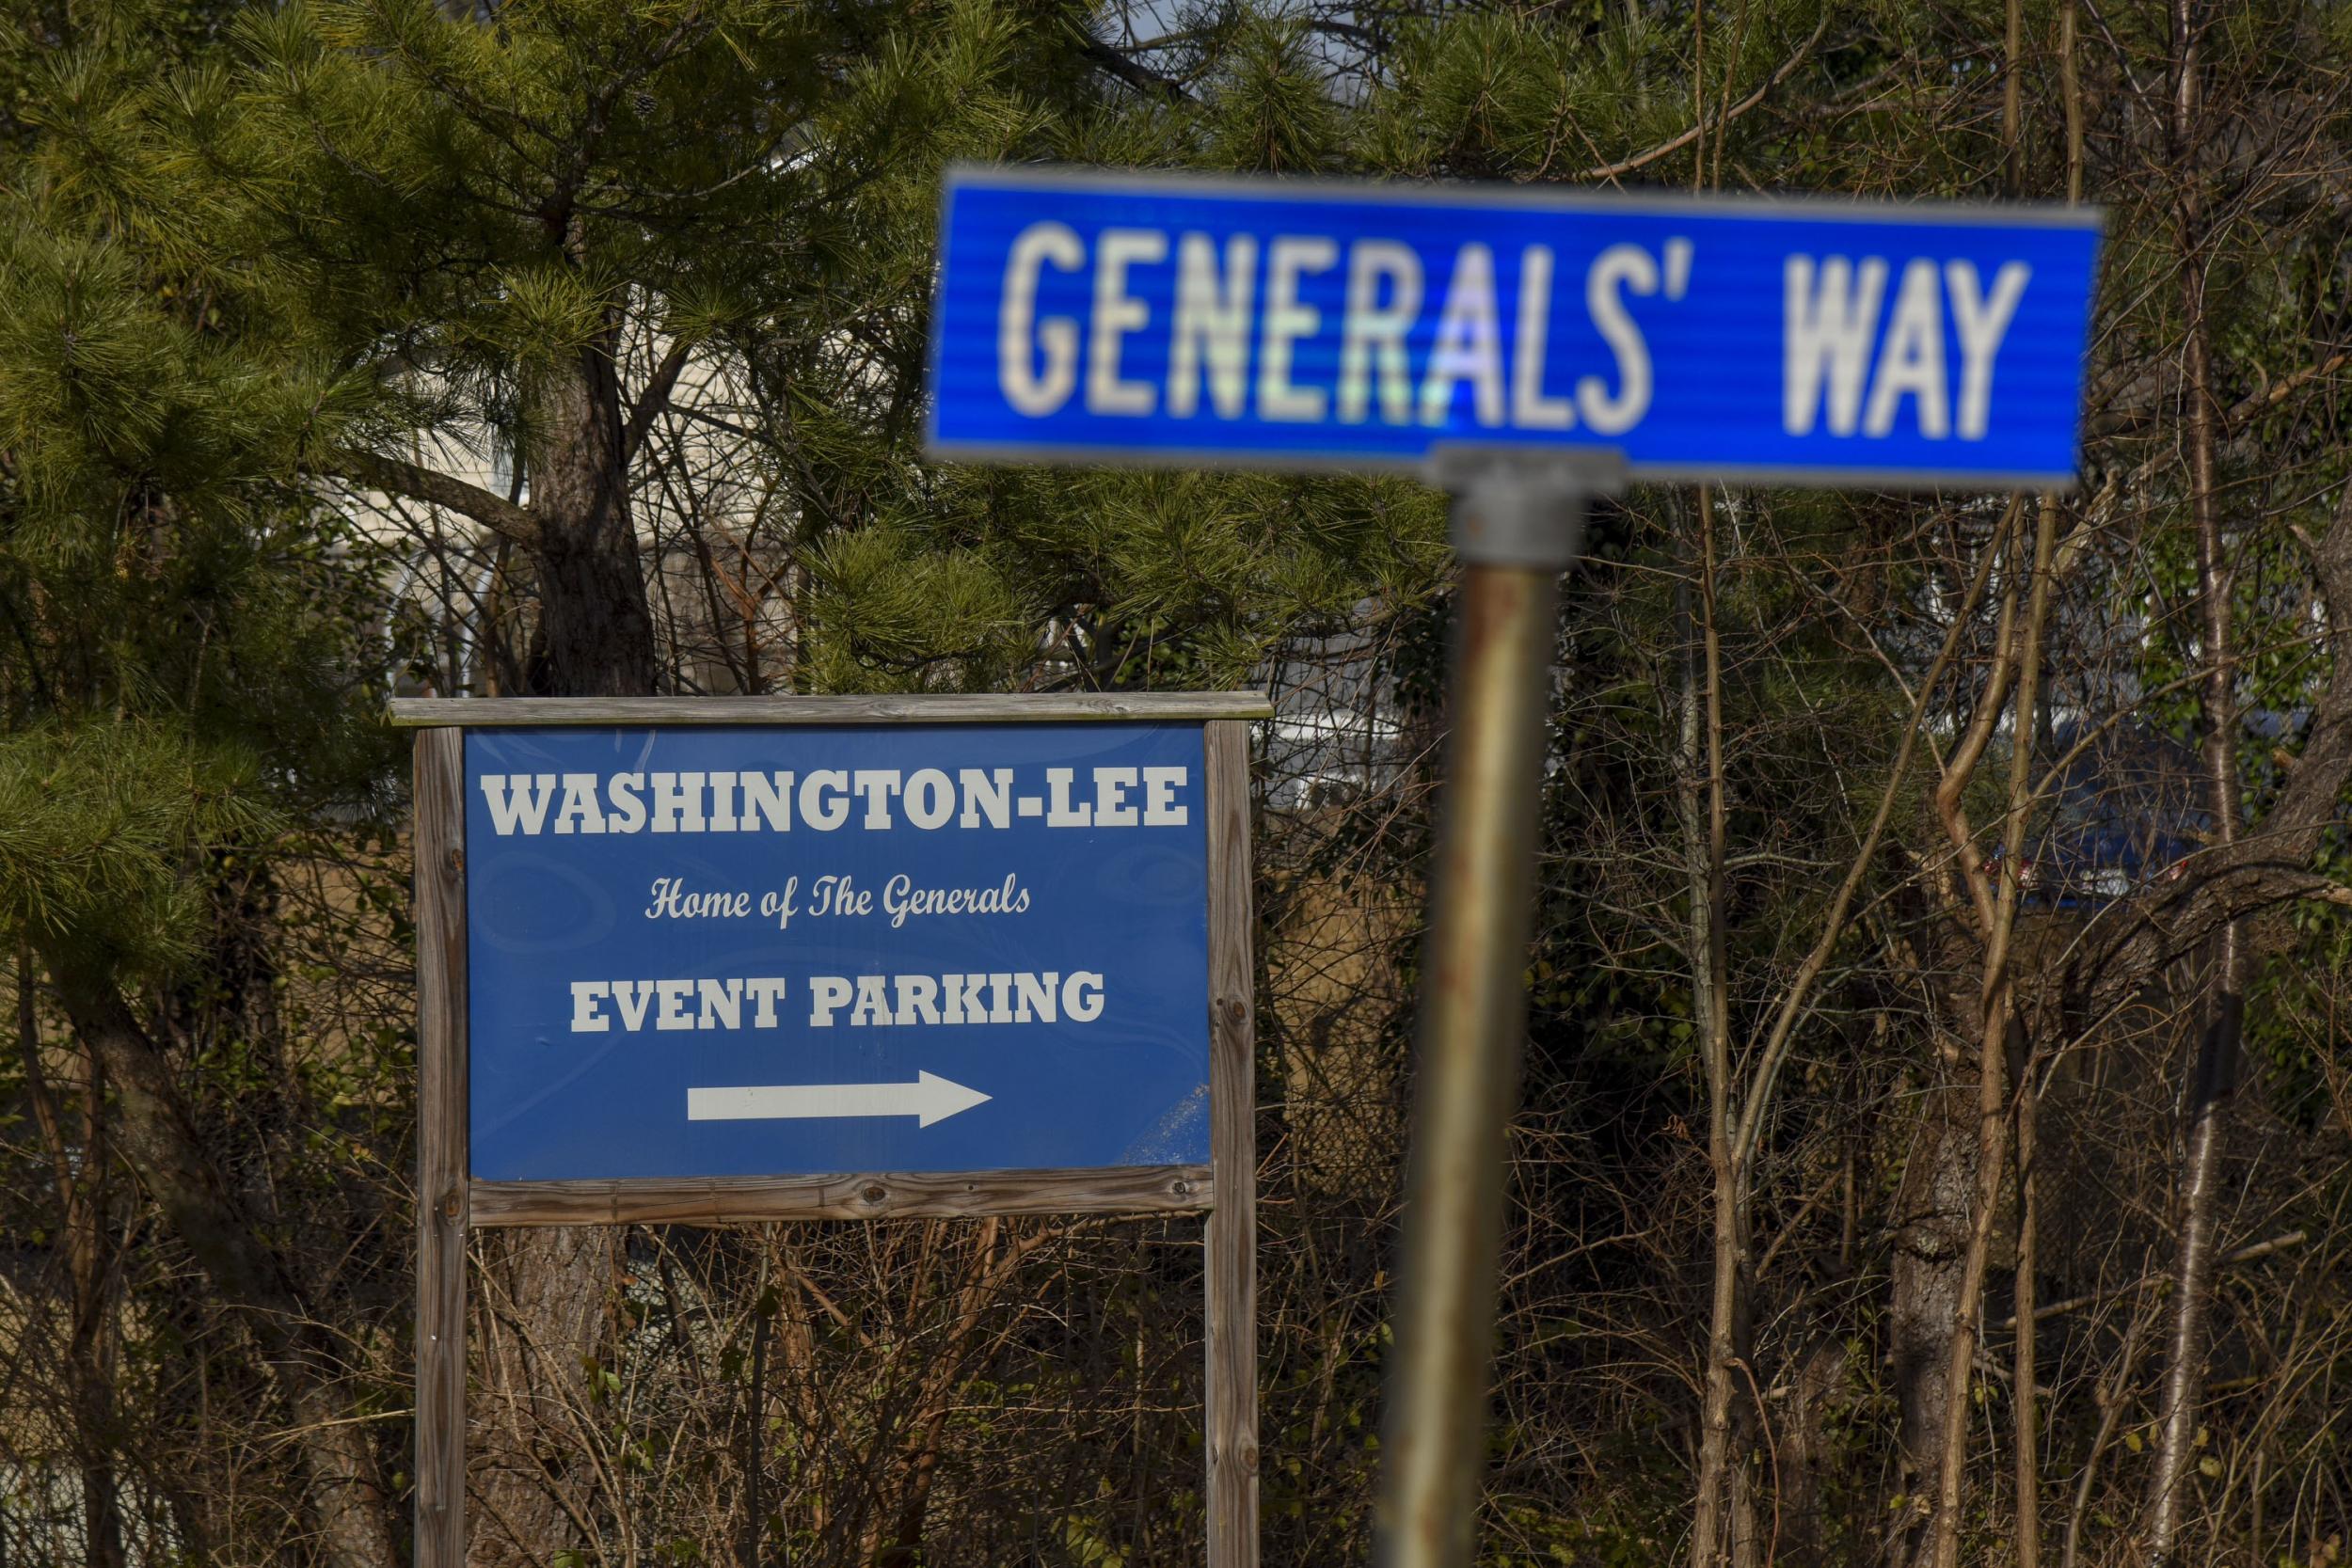 Washington-Lee High School in Arlington is named after Confederate general Robert E Lee